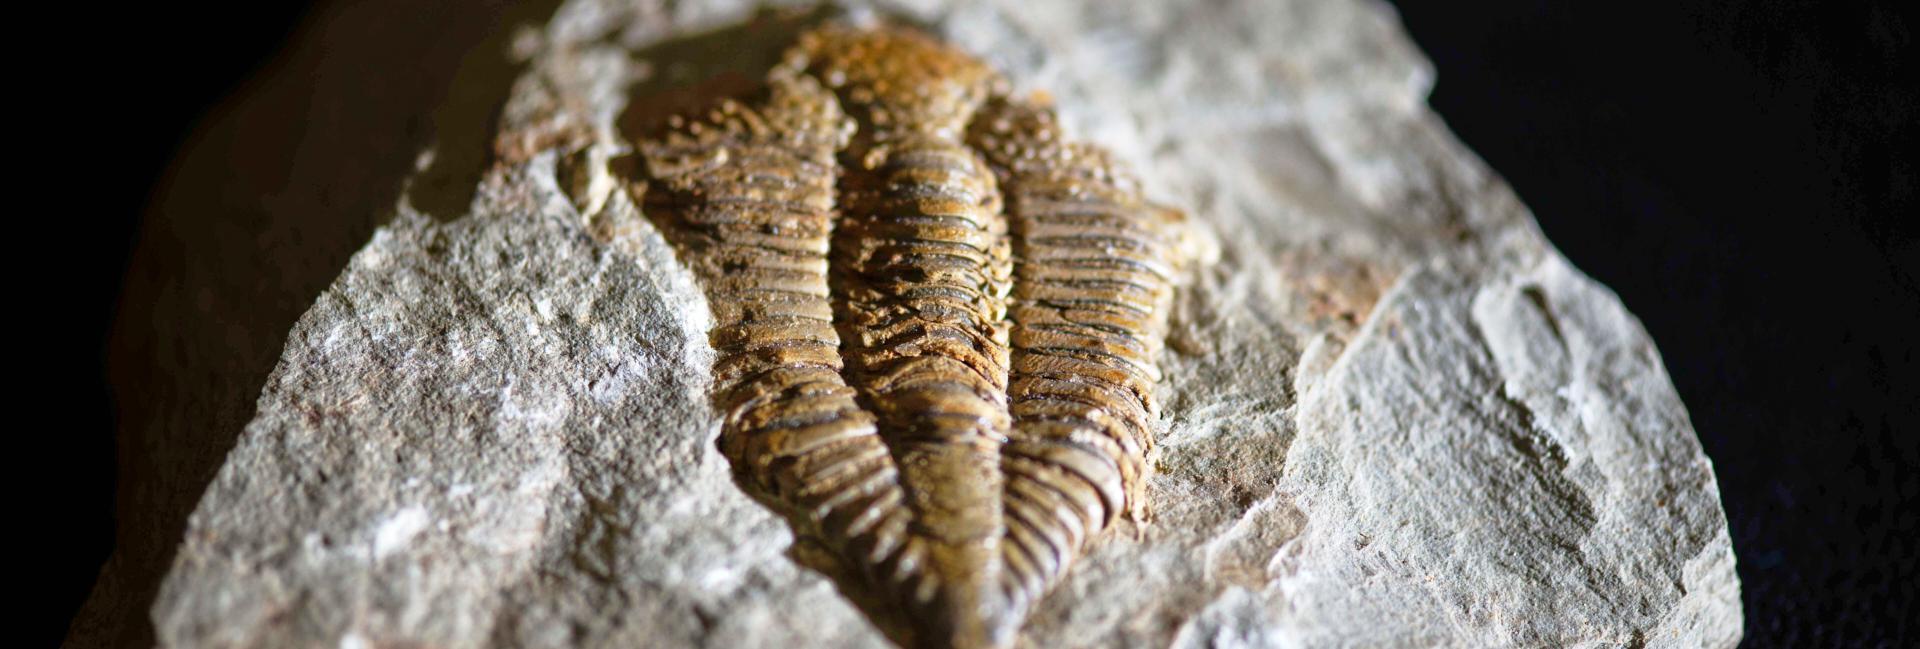 420 million year old trilobite fossil in rock